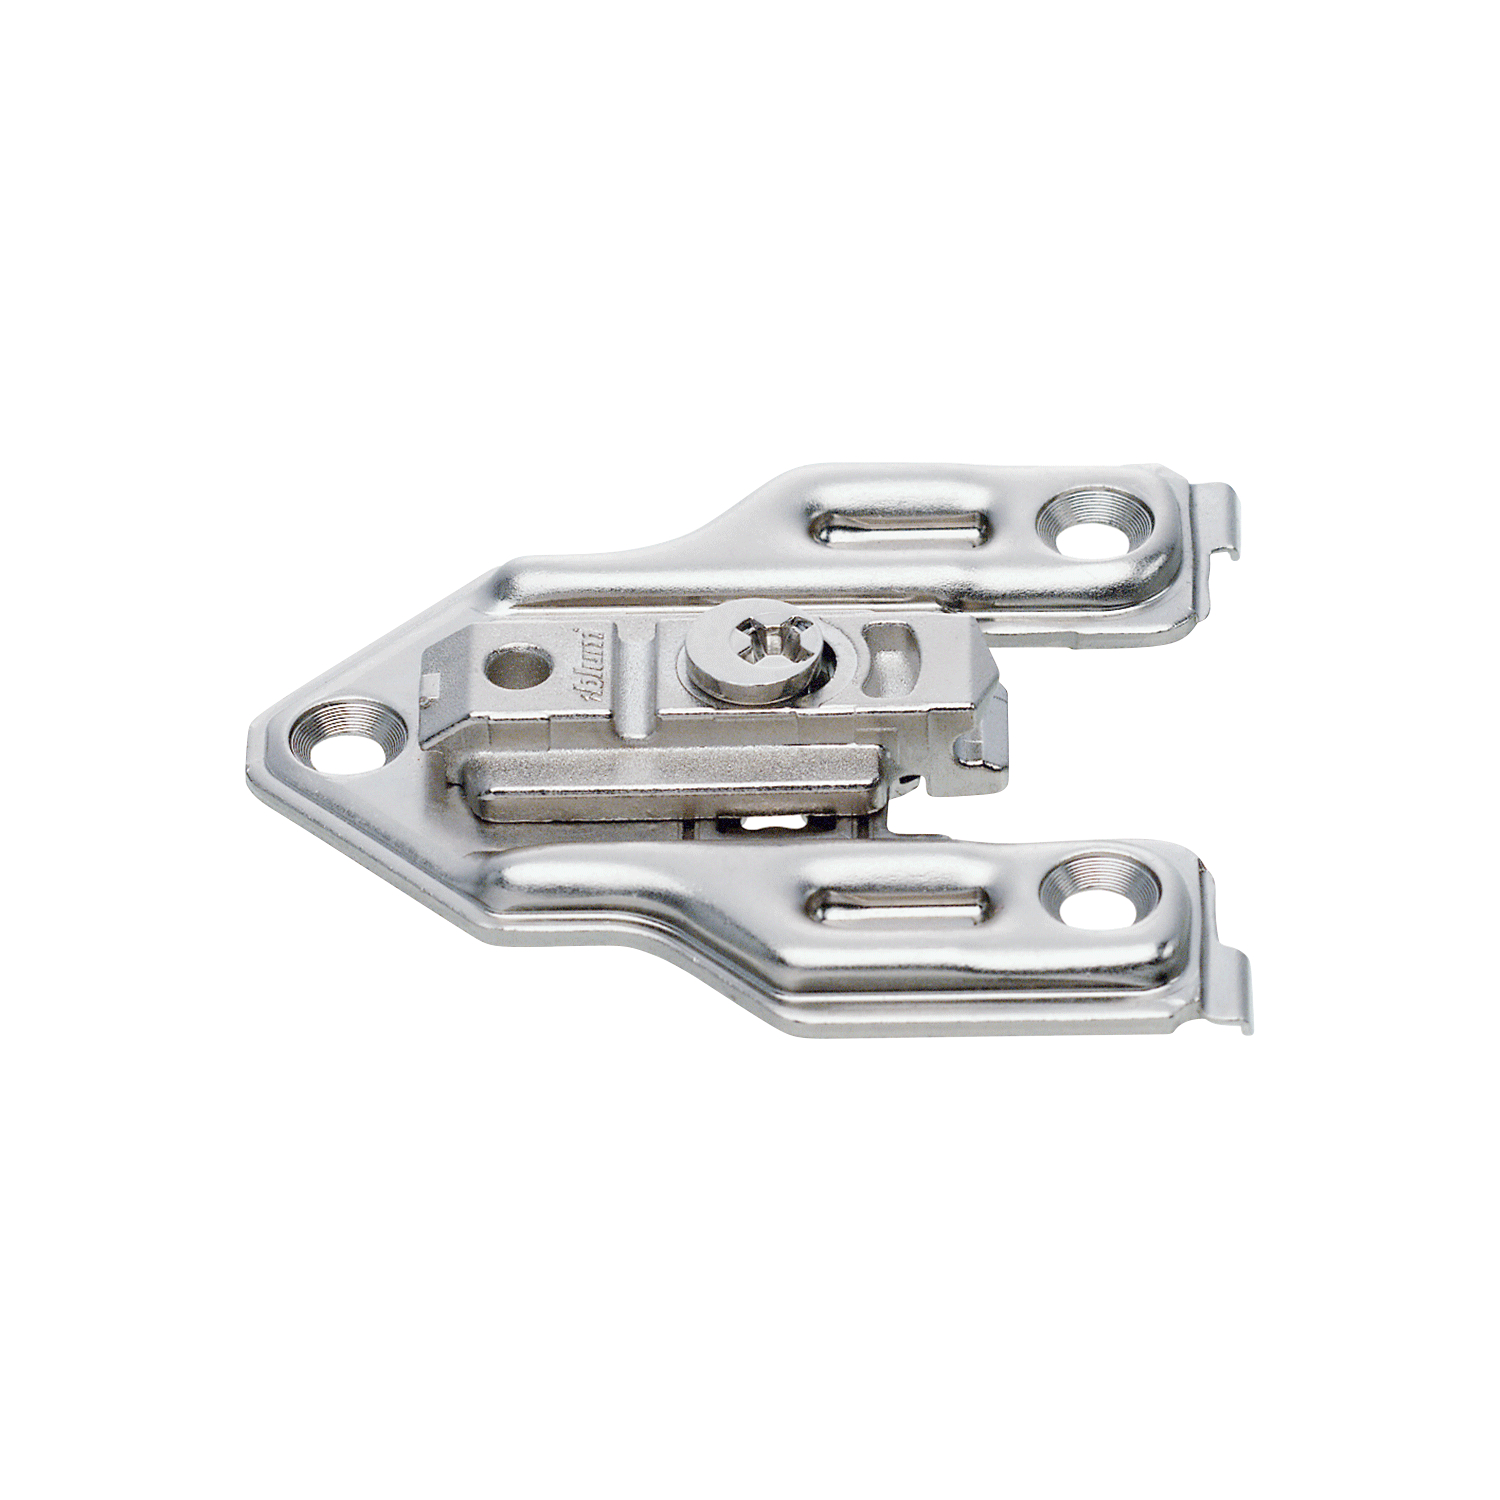 Blum 10-Pack Clip Face Frame Screw-on 0mm Mounting Plate, Nickel Plated - image 1 of 3